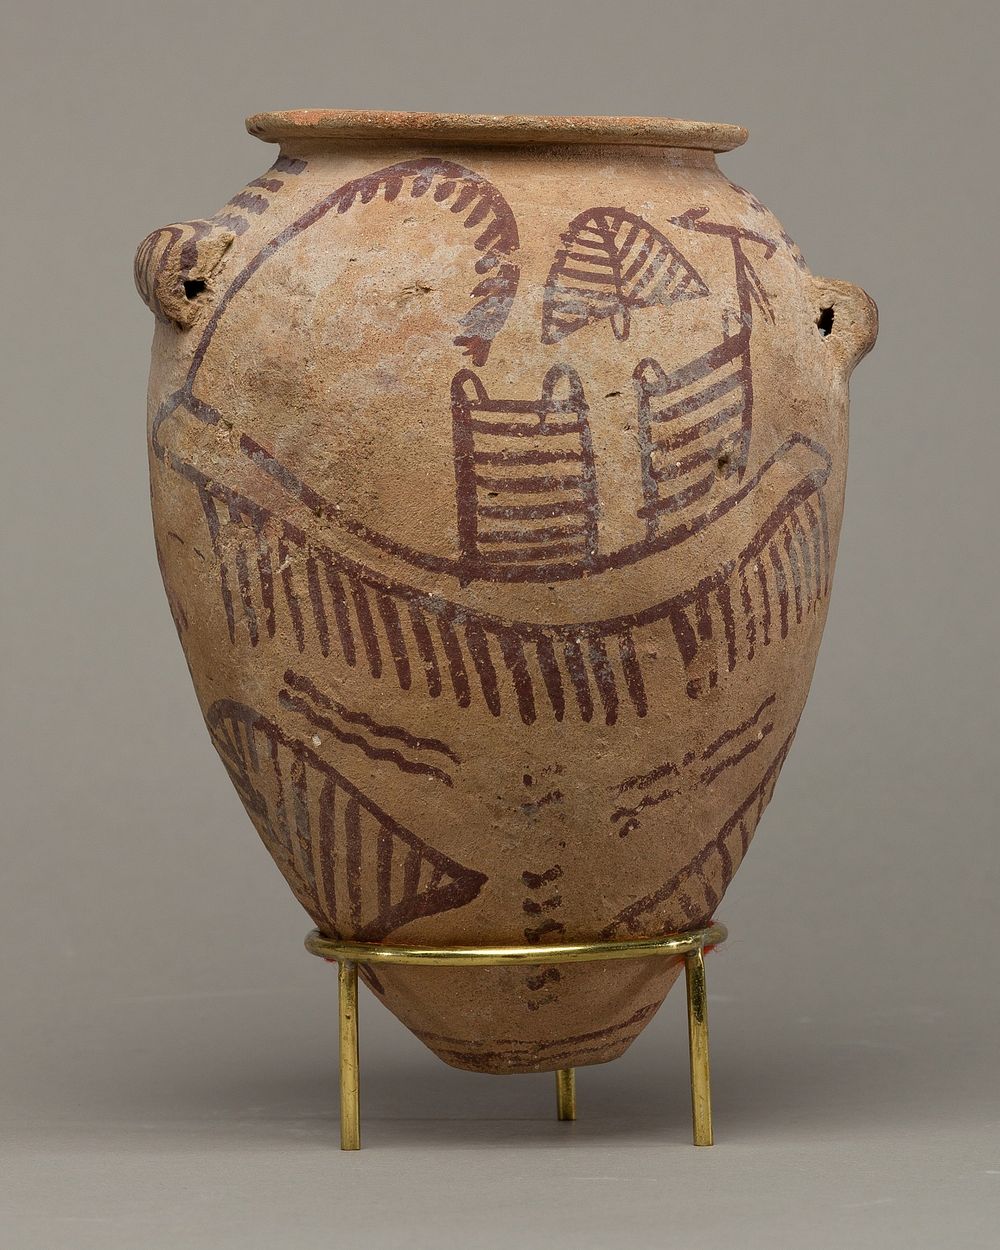 Lugged jar depicting two boats